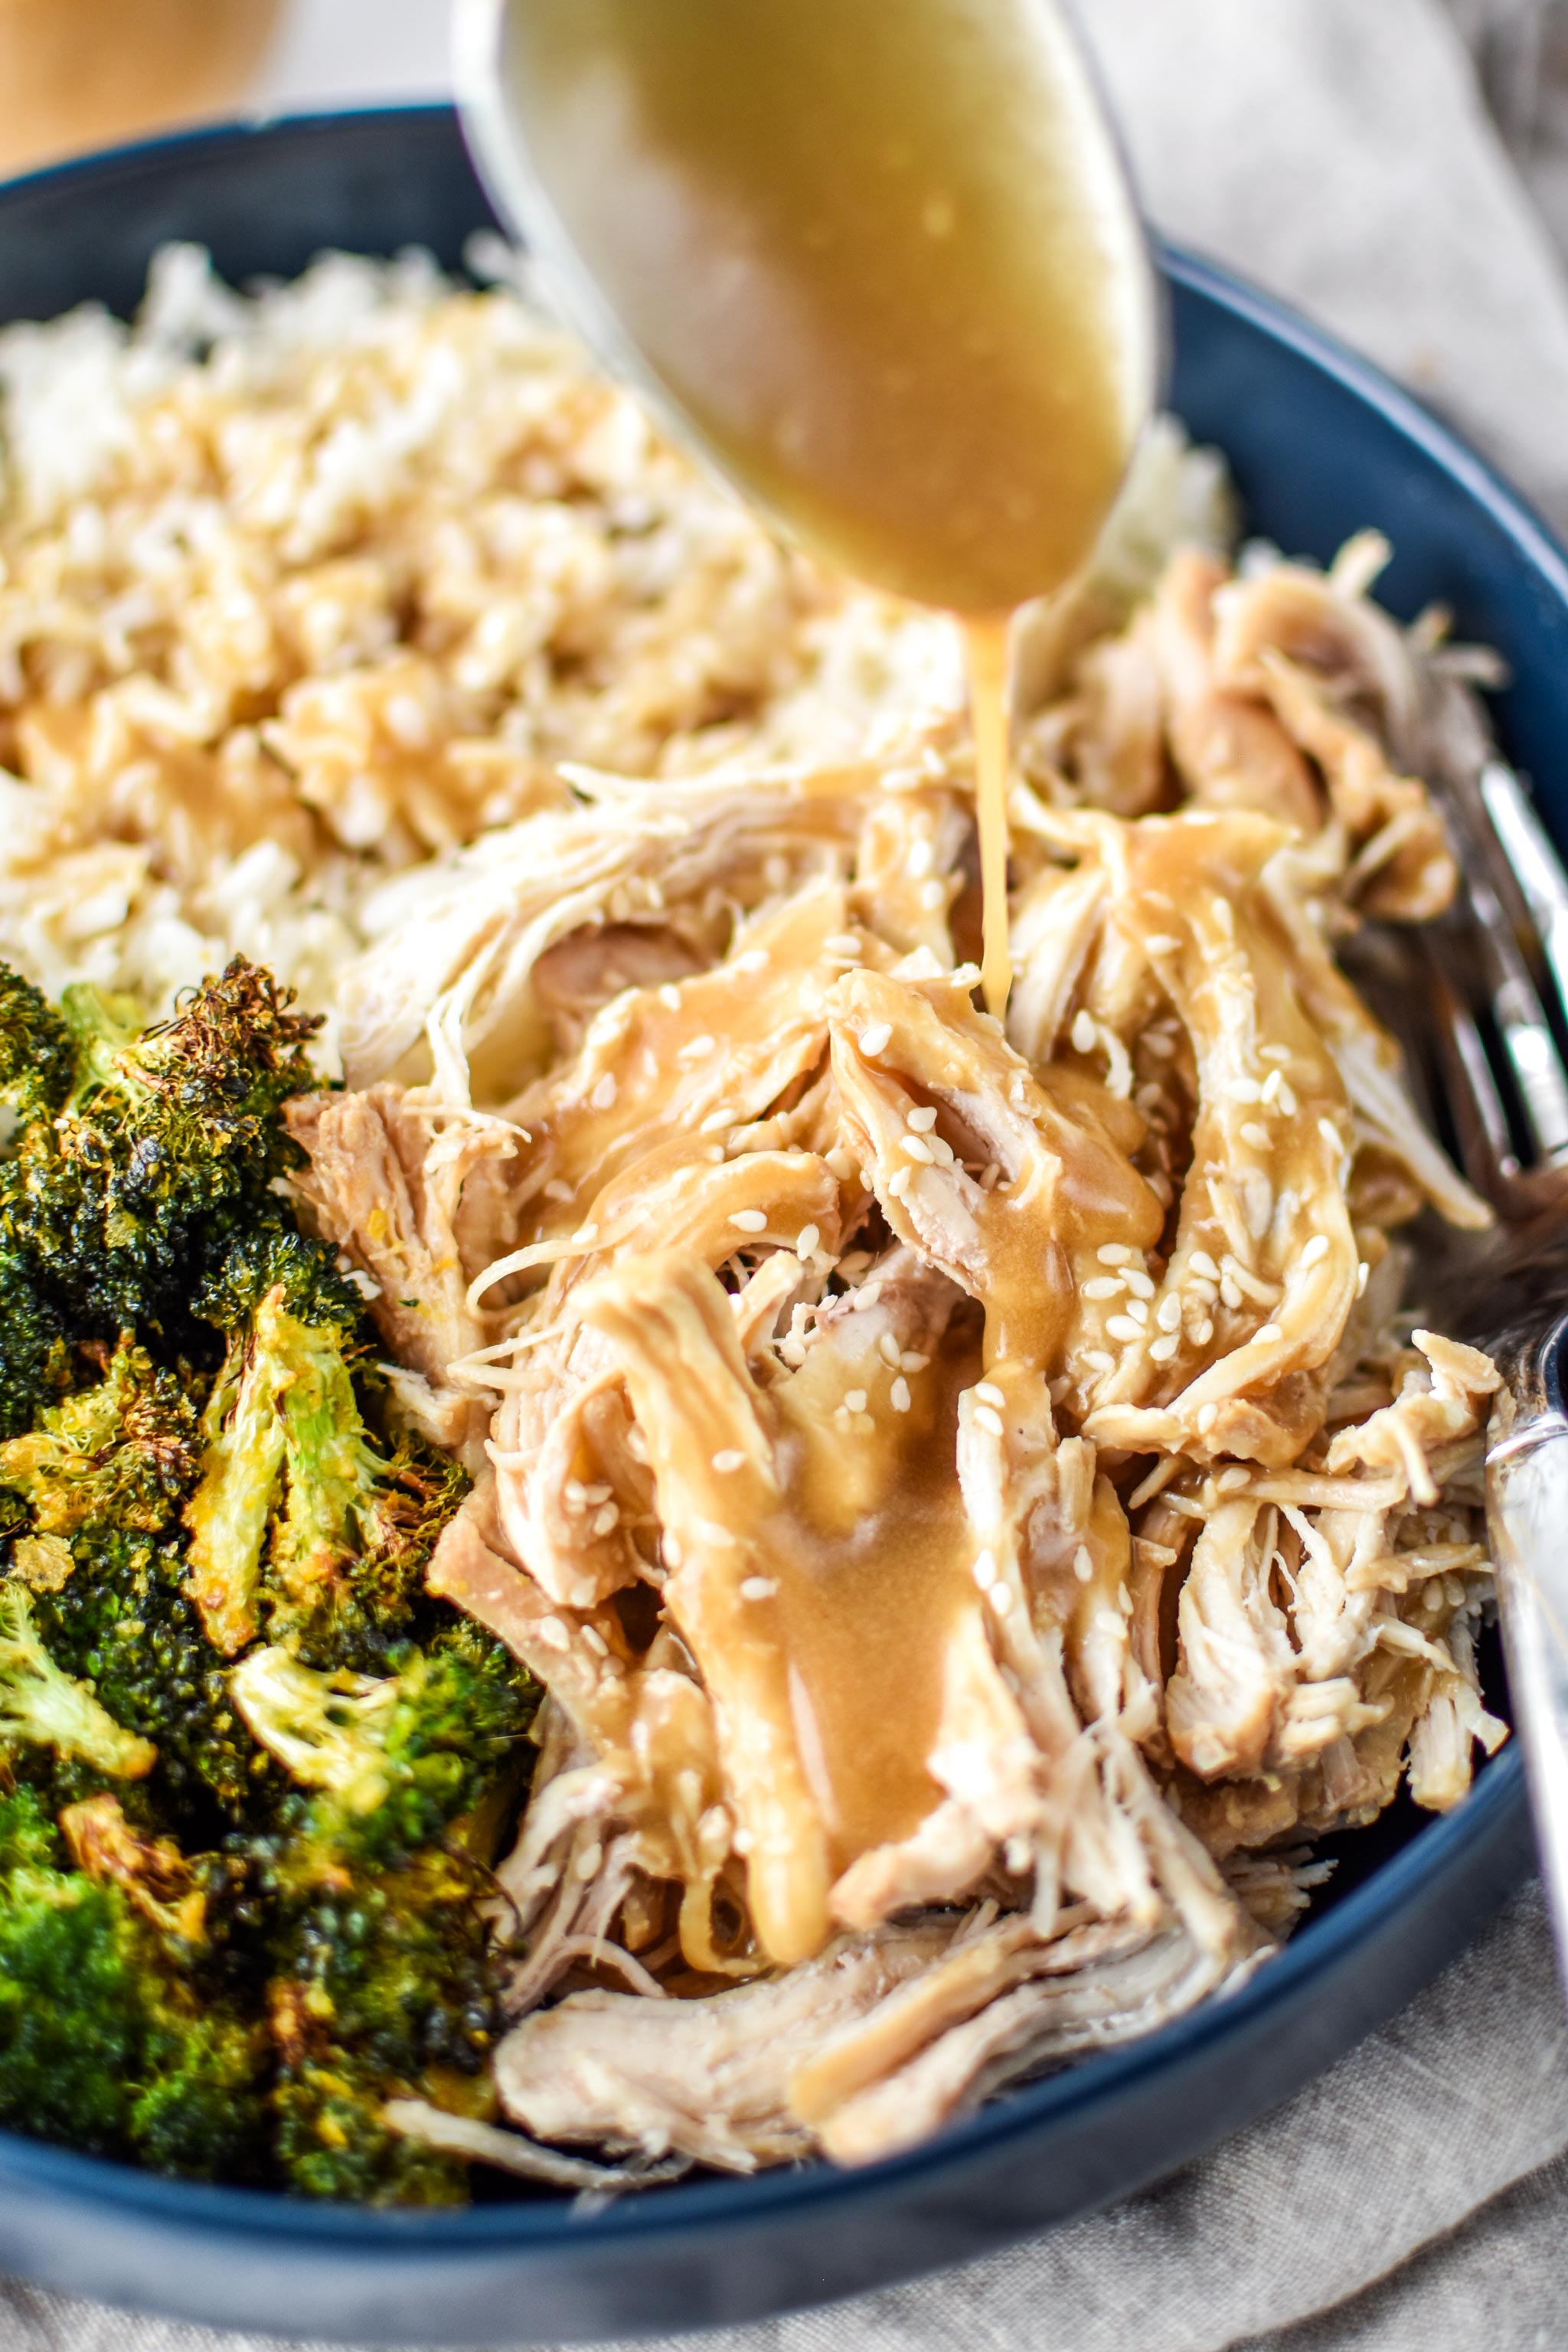 Eating sesame shredded chicken with rice and broccoli